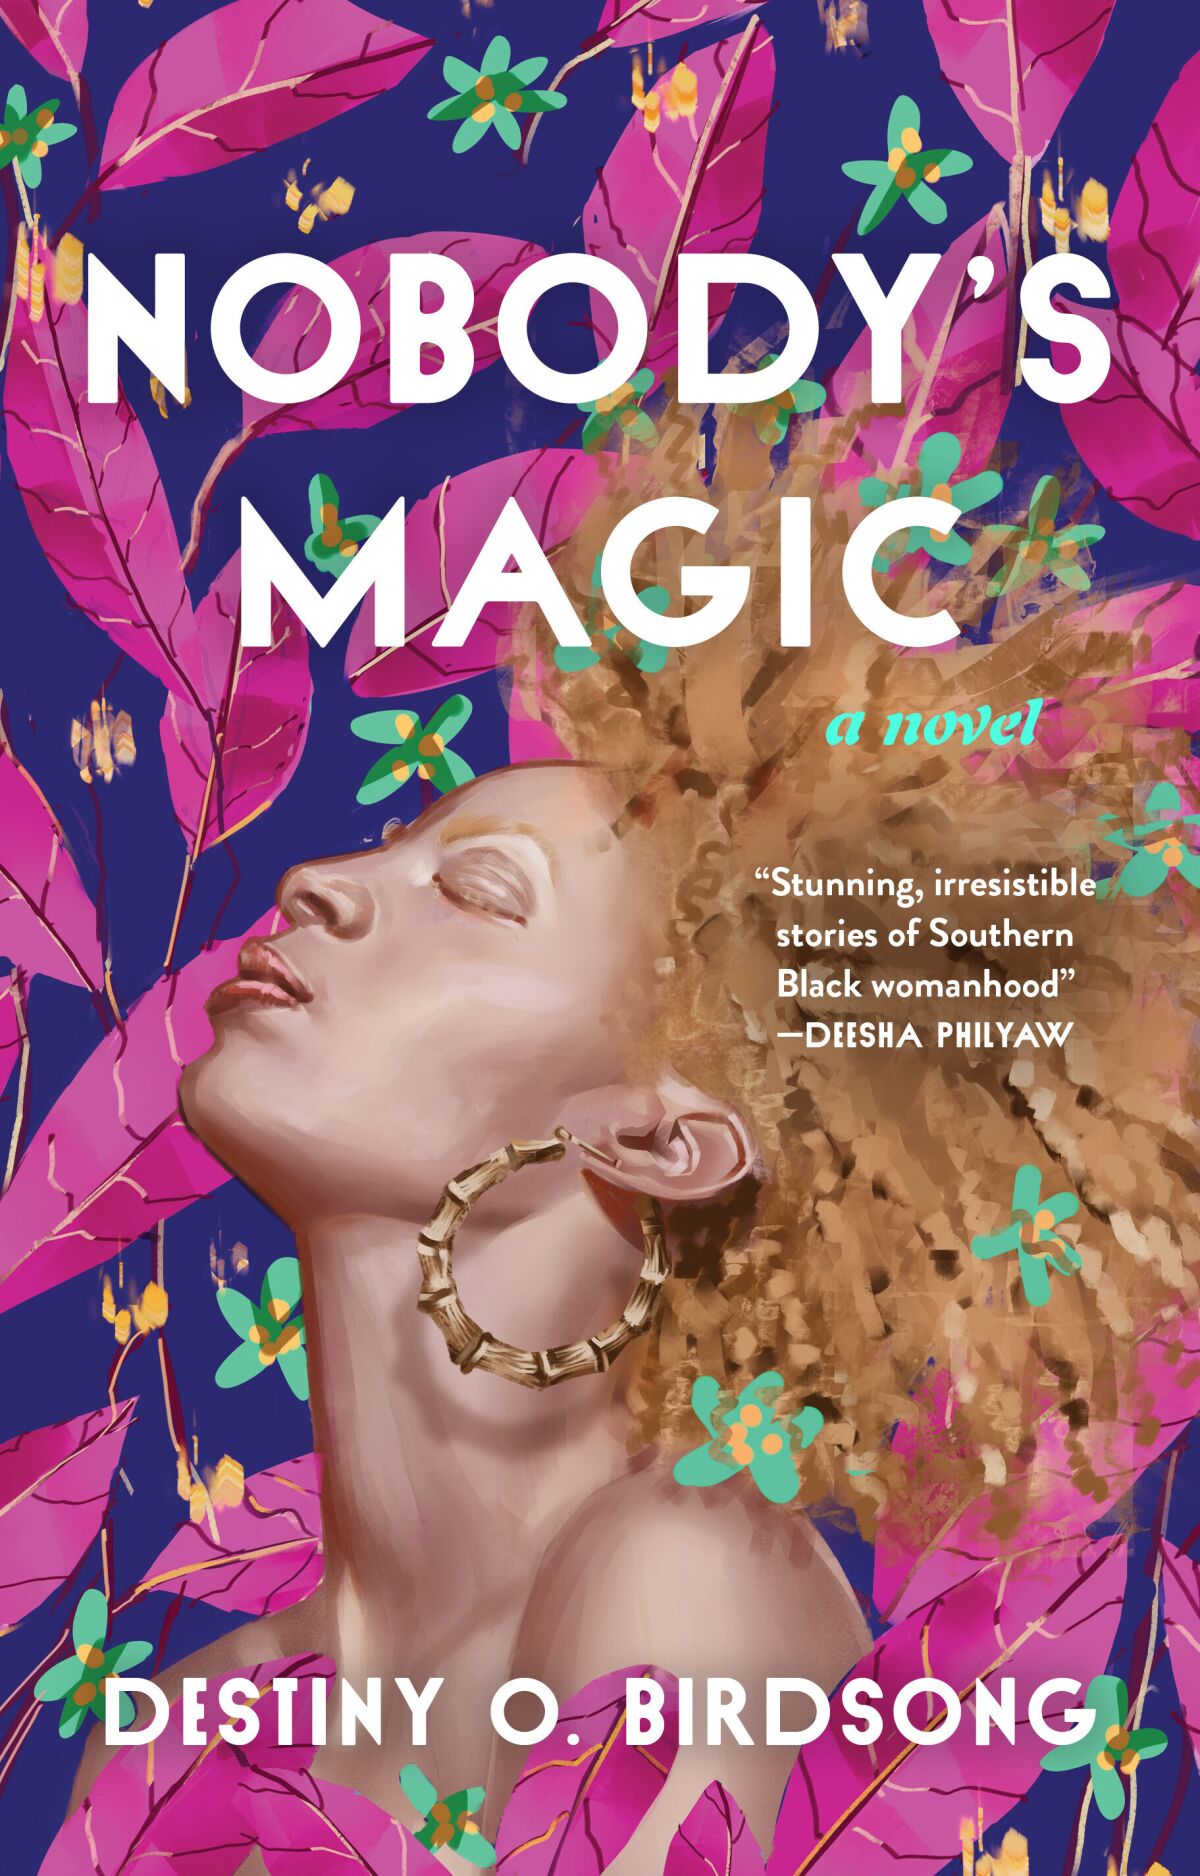 This book cover image released by Grand Central Publishing shows "Nobody’s Magic" by Destiny O. Birdsong. (Grand Central Publishing via AP)